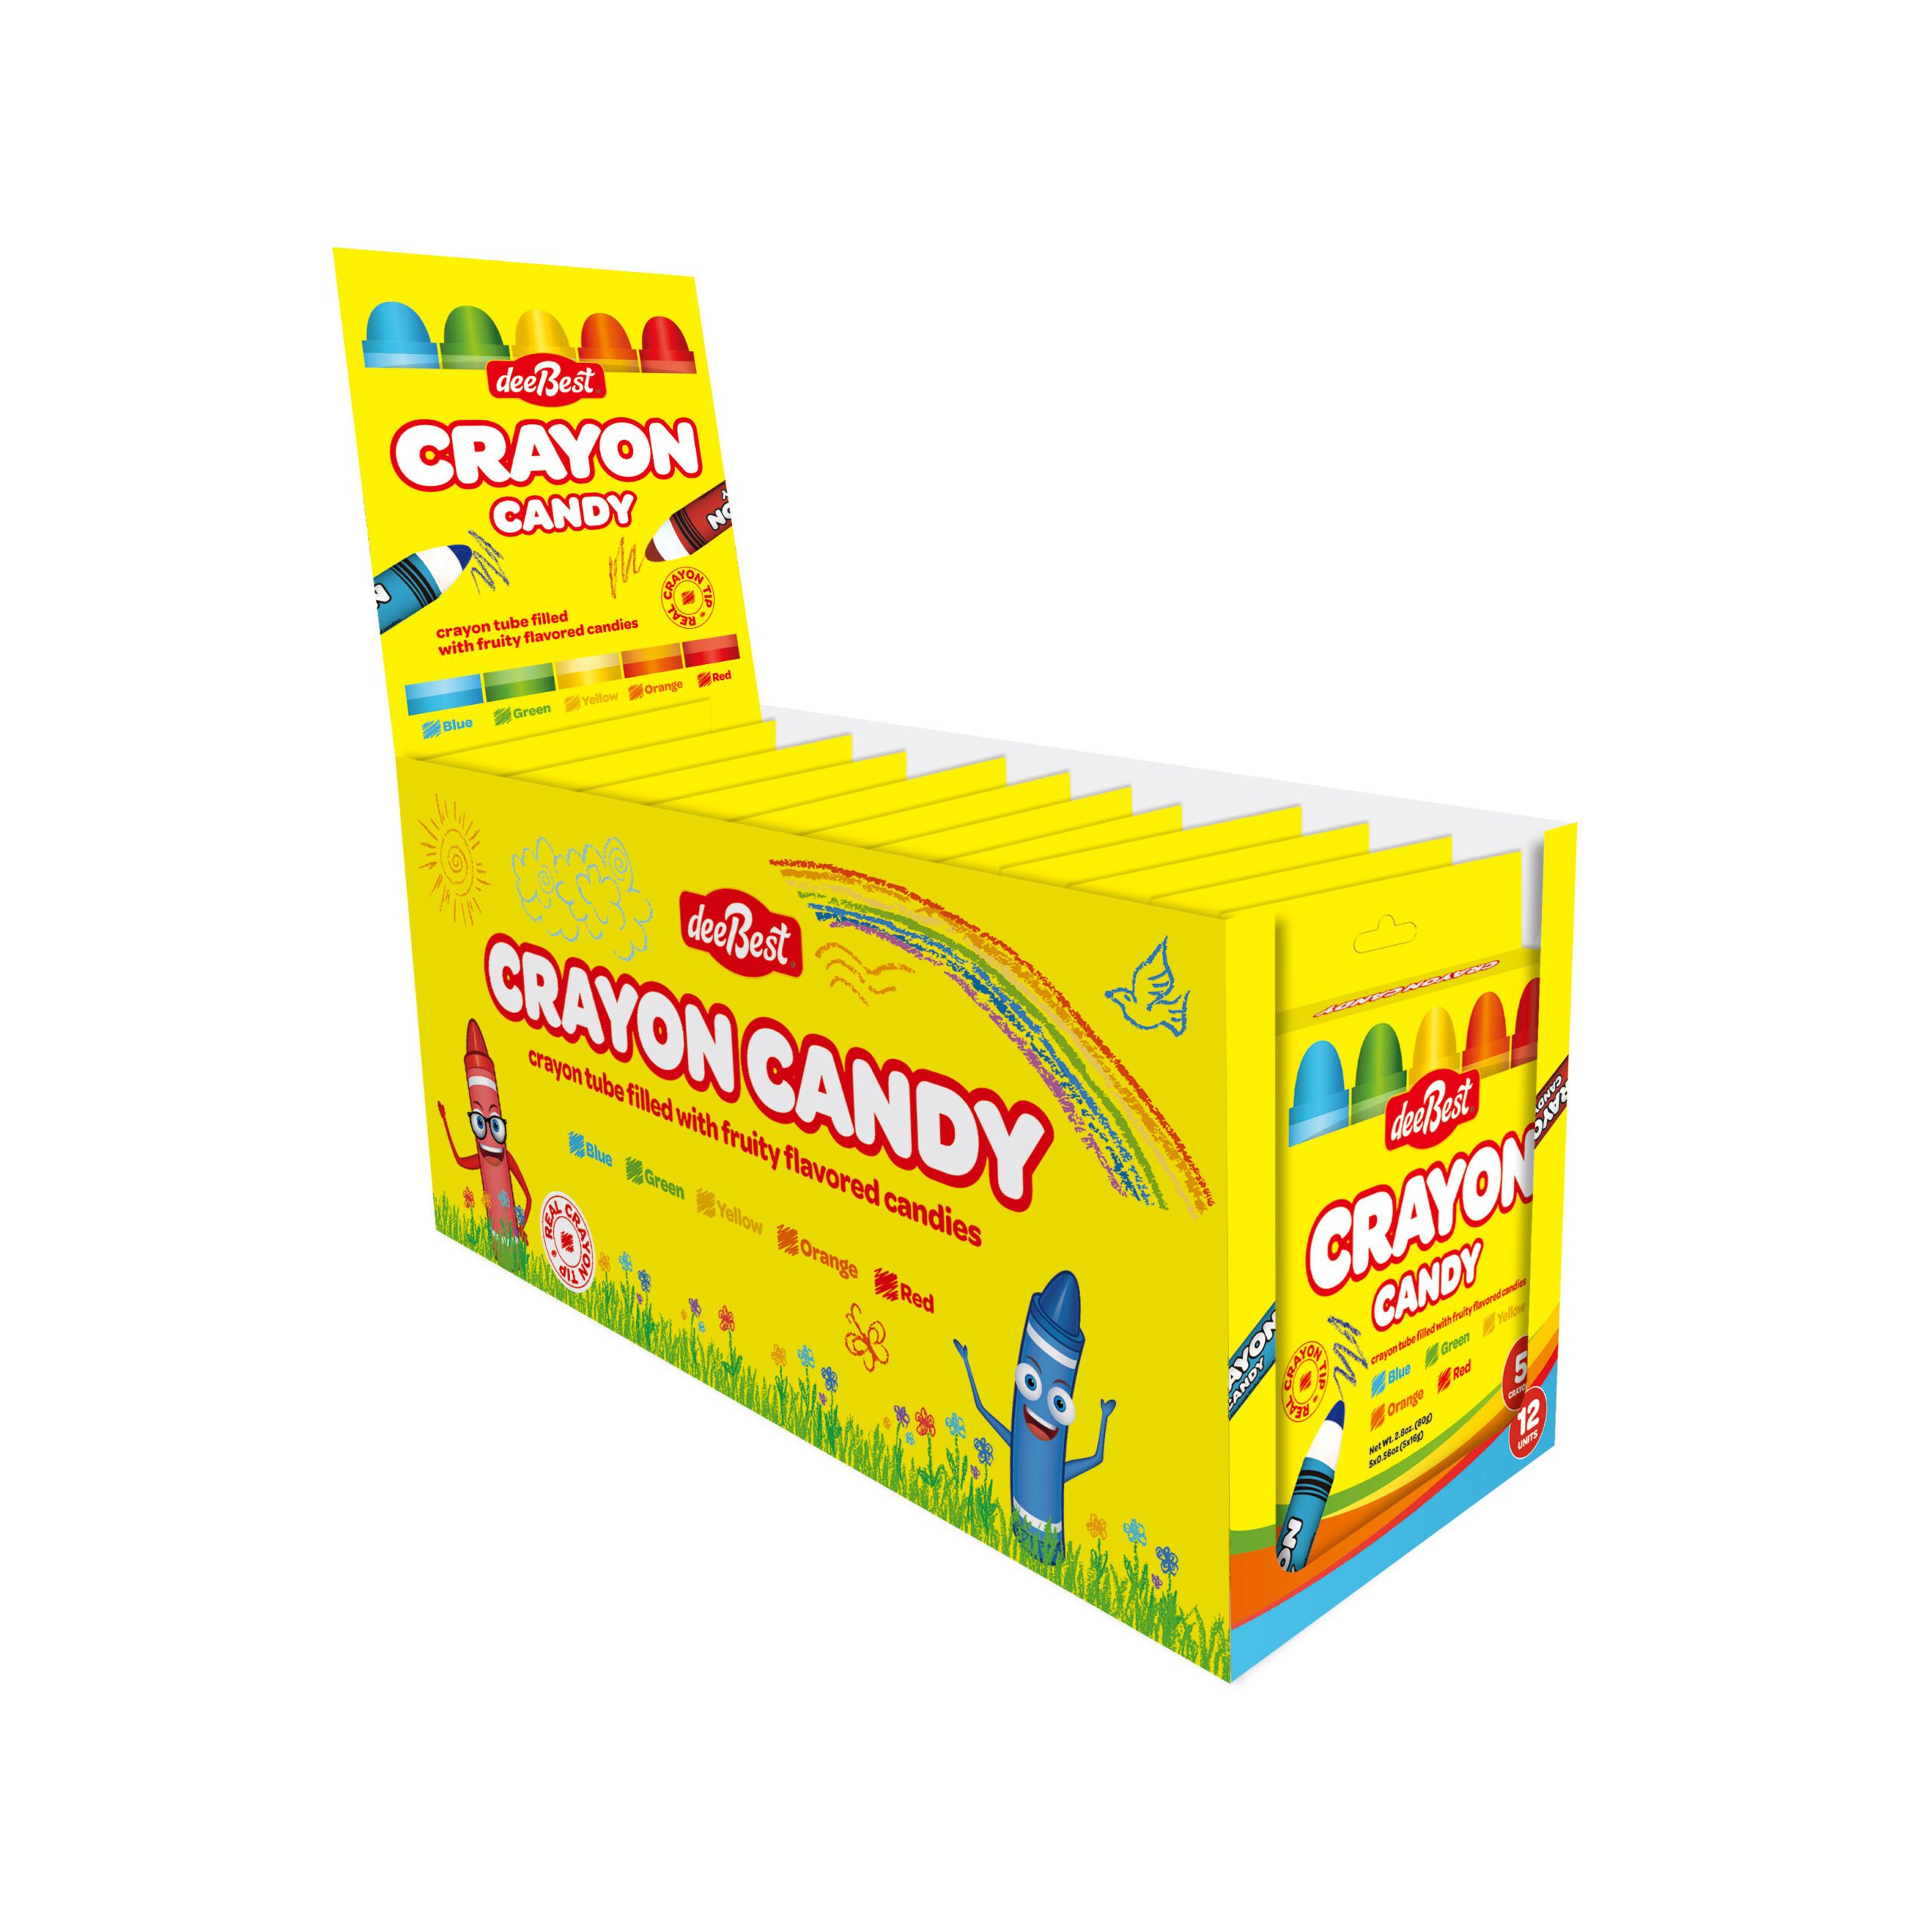 DEE BEST CRAYON CANDY 5 PACK